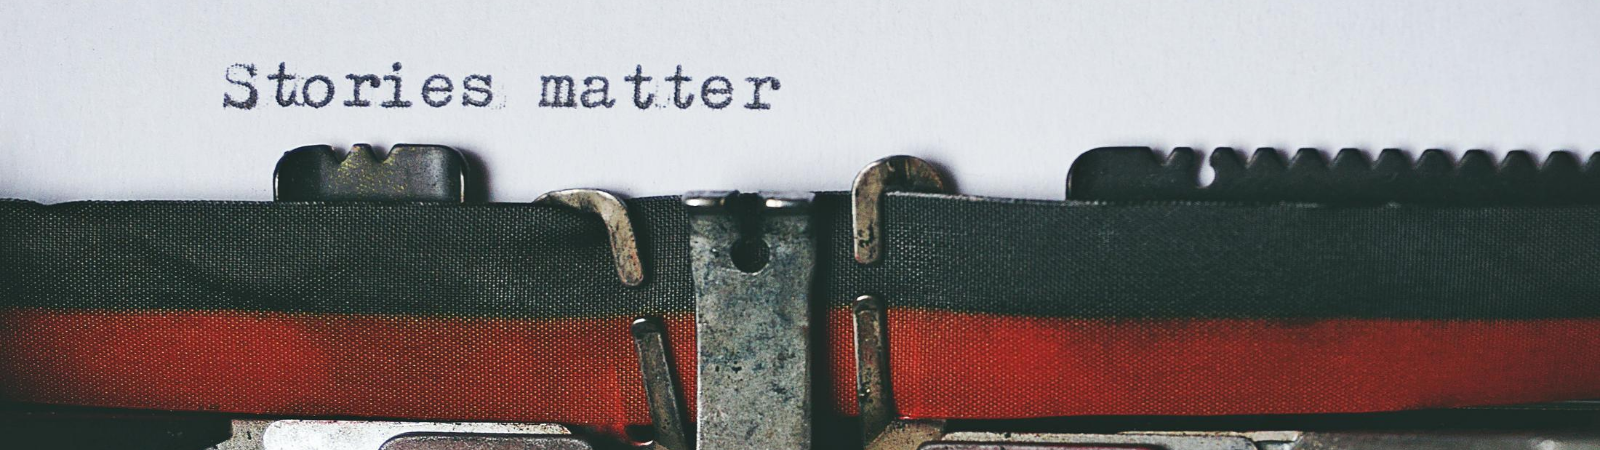 Ribbon on a typewriter with the words "stories matter" above